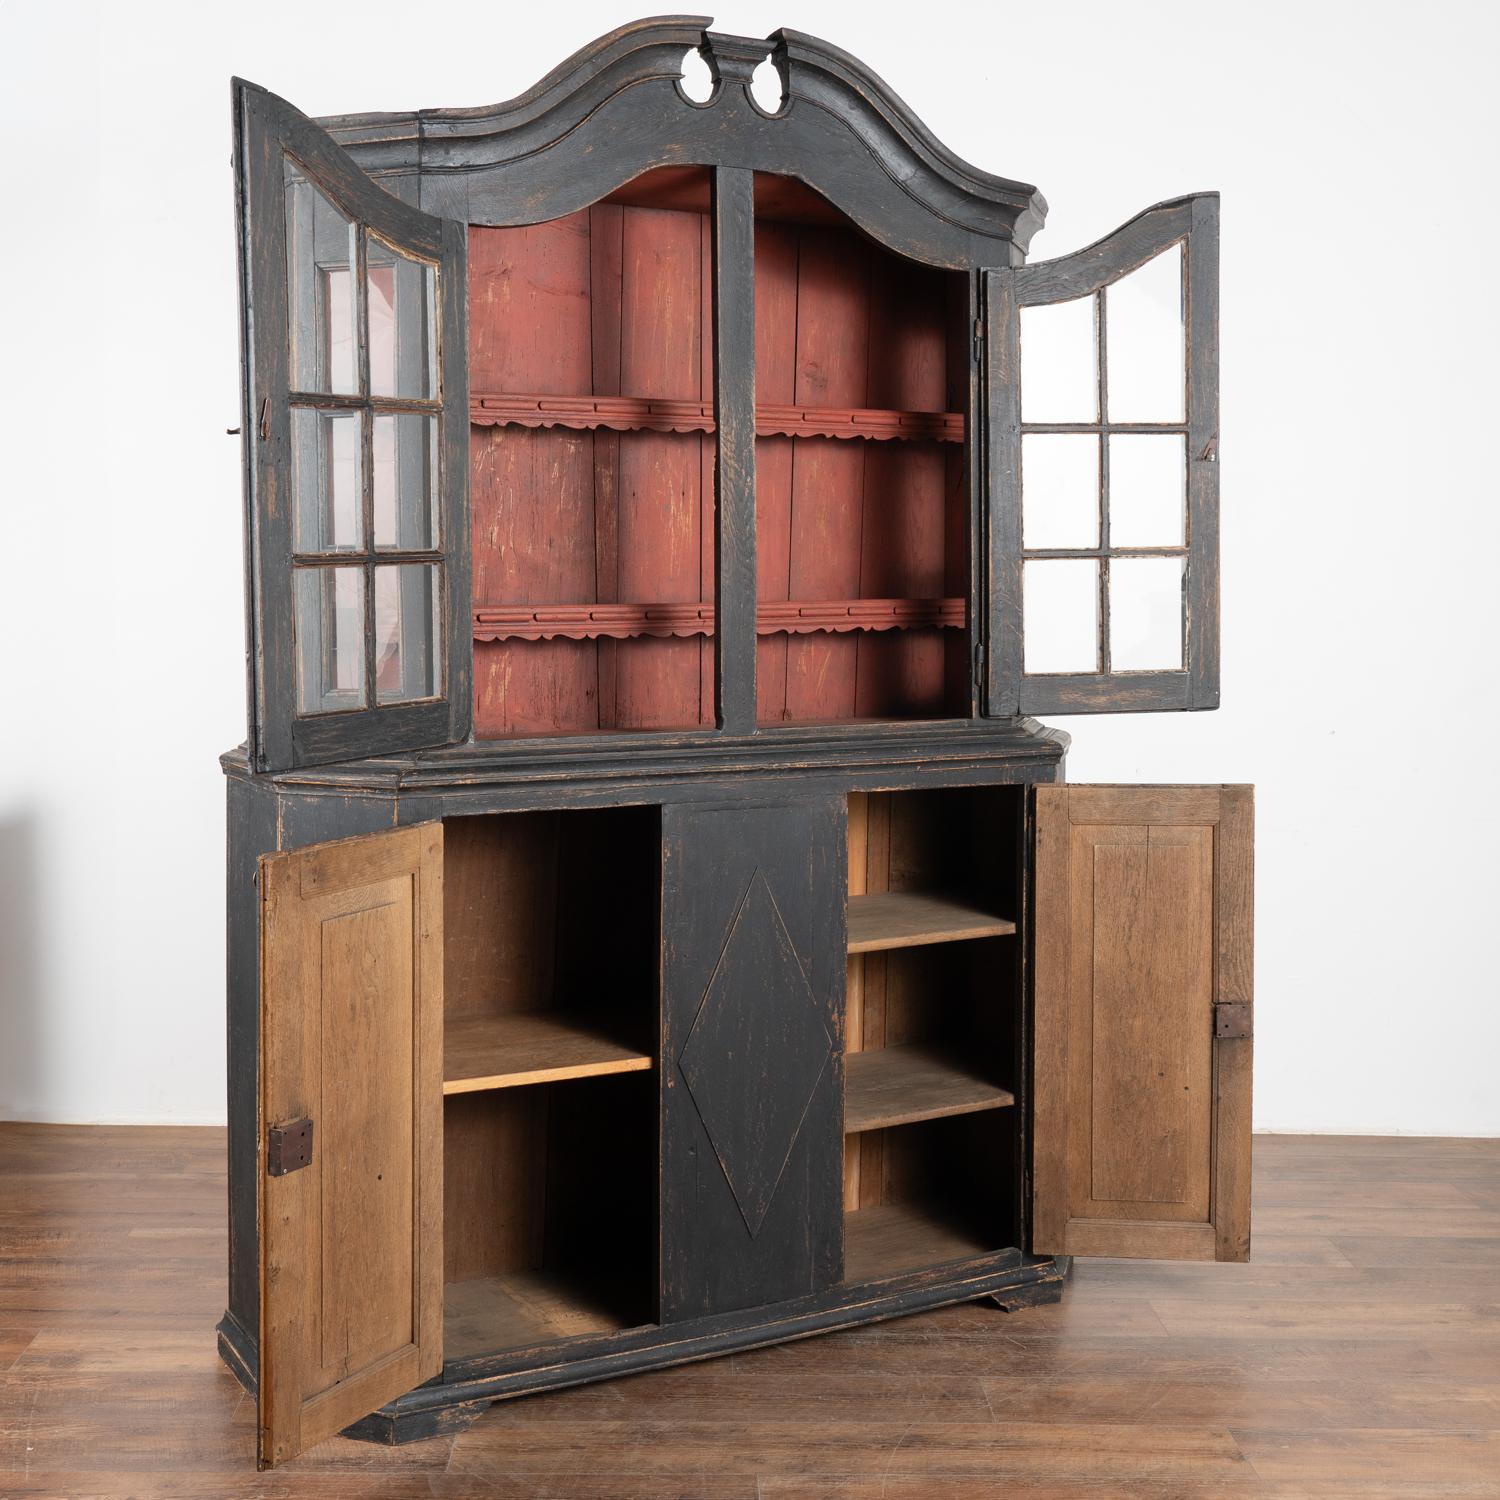 Country Black Painted Display Cabinet Bookcase with Glass Doors, Denmark circa 1770 For Sale